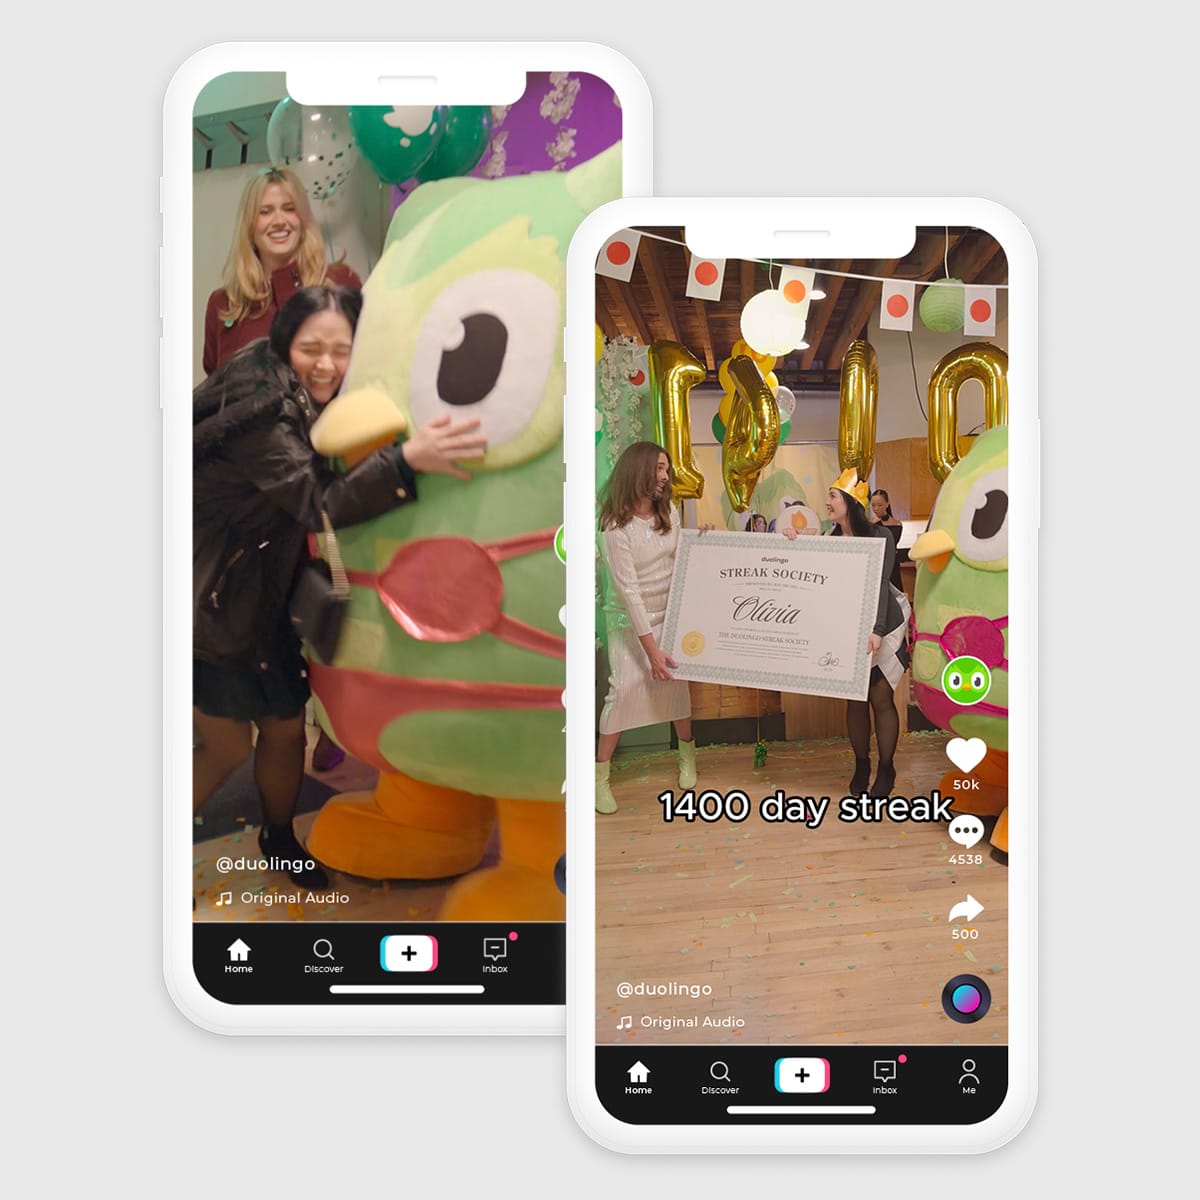 Two iPhone screens showing stills from the surprise party hosted by Duolingo and Jonathan van Ness. The left shows the learner, Olivia, hugging Duo while he's wearing a bikini. The right shows JVN presenting learner Olivia with a large certificate naming her a member of the STREAK SOCIETY